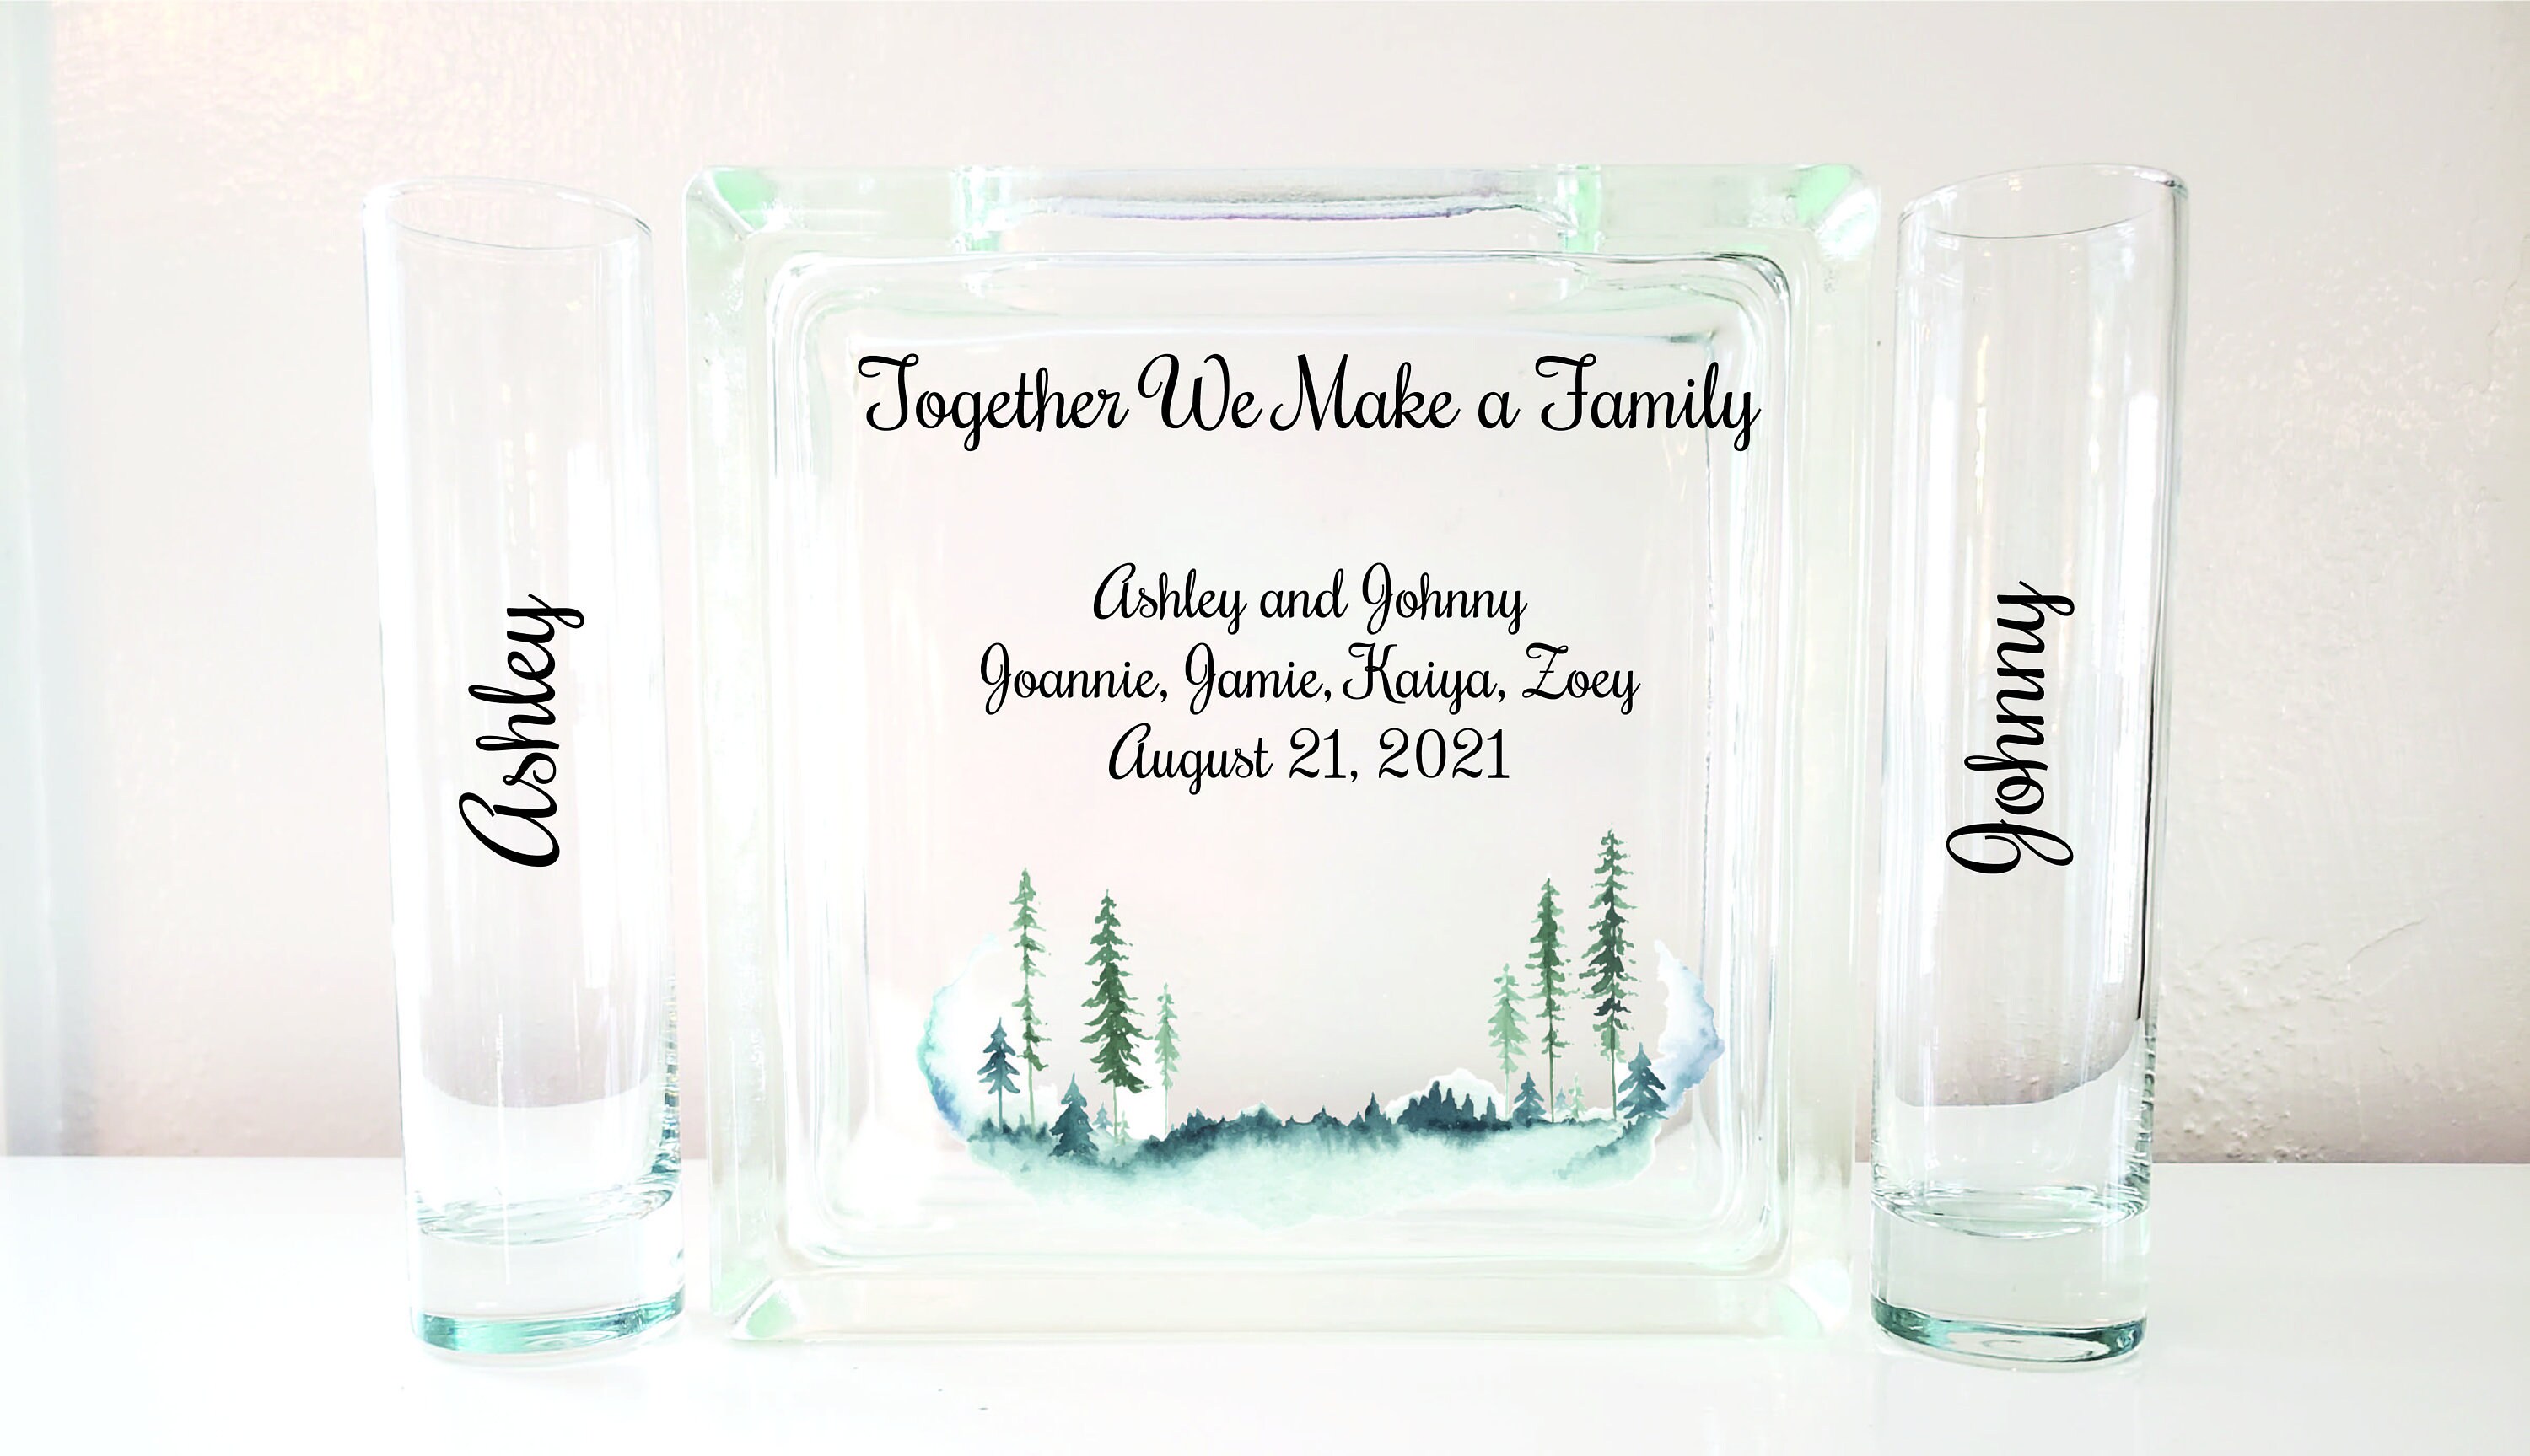 Wedding Unity Sand Ceremony Set Blended Family Together We Make A Family-Blended Family-Tree-Tpuwus308